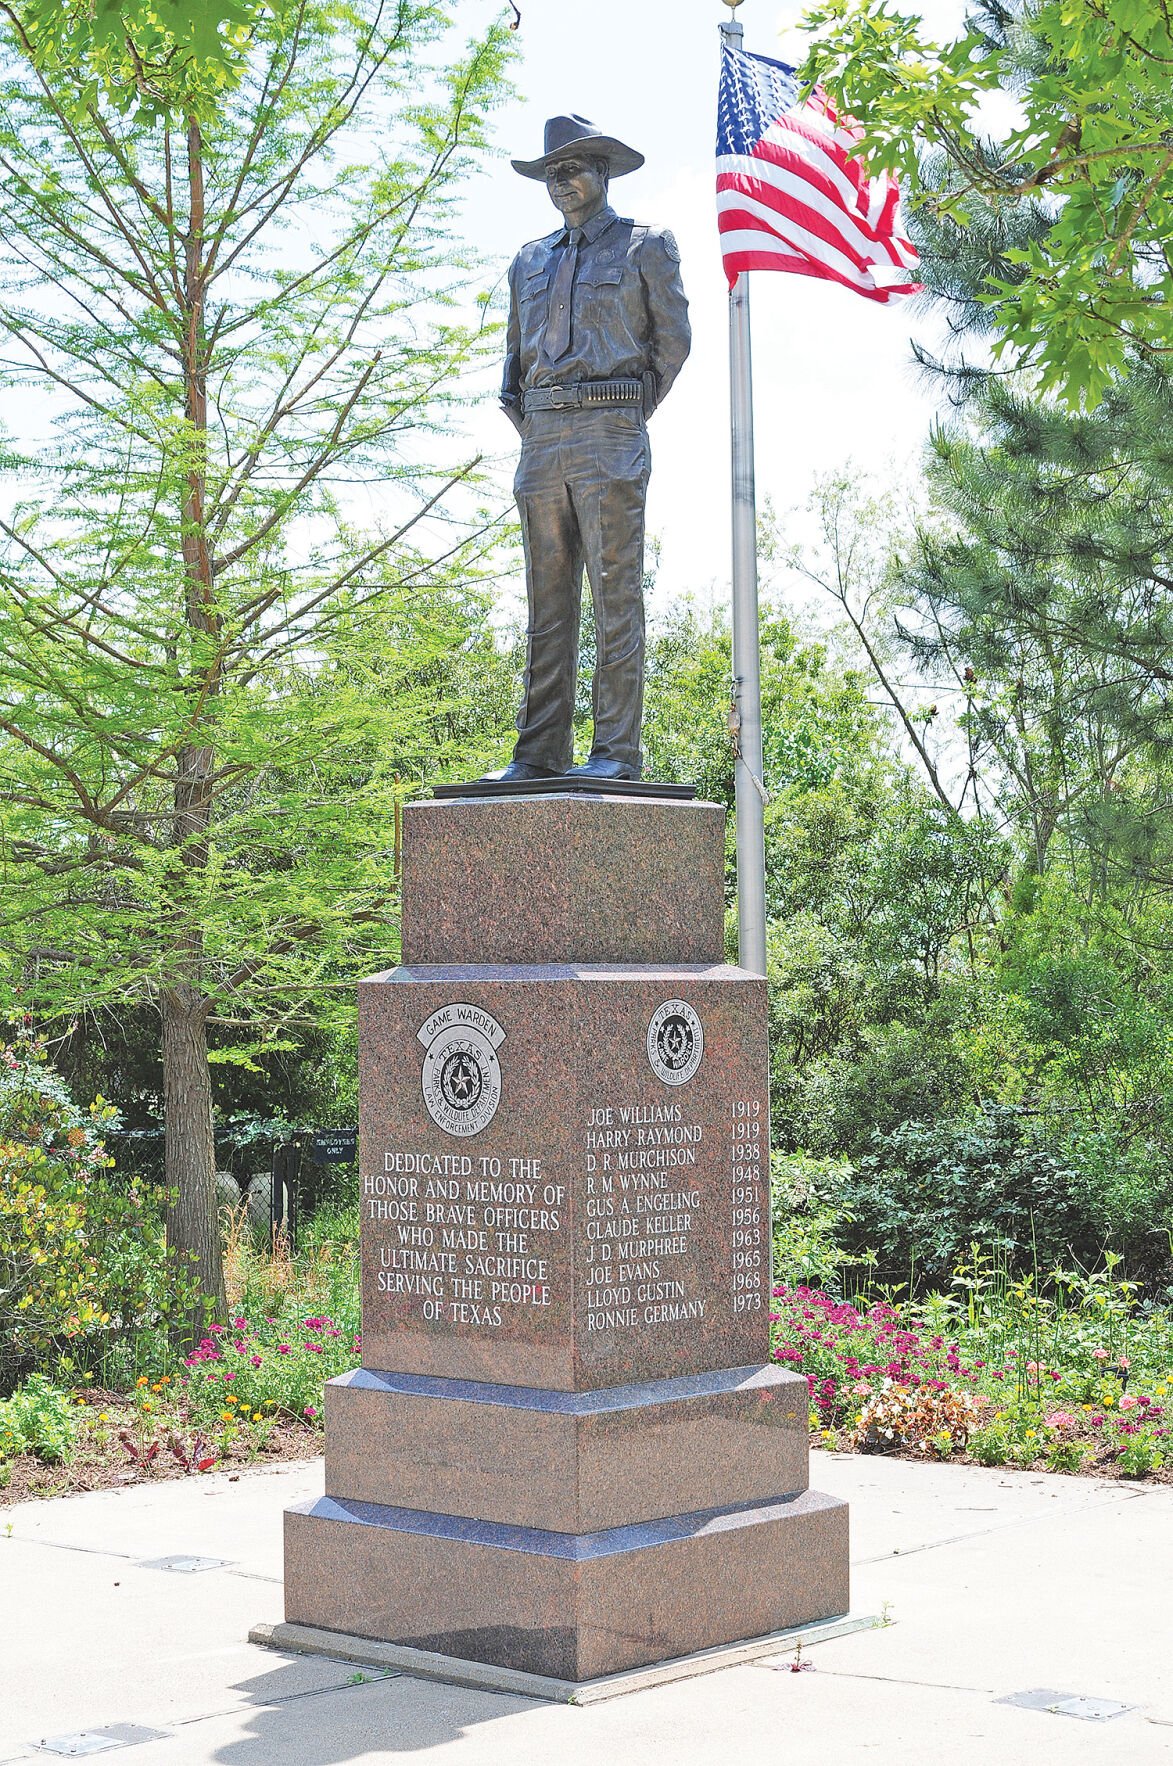 Game warden statue moving to state capital